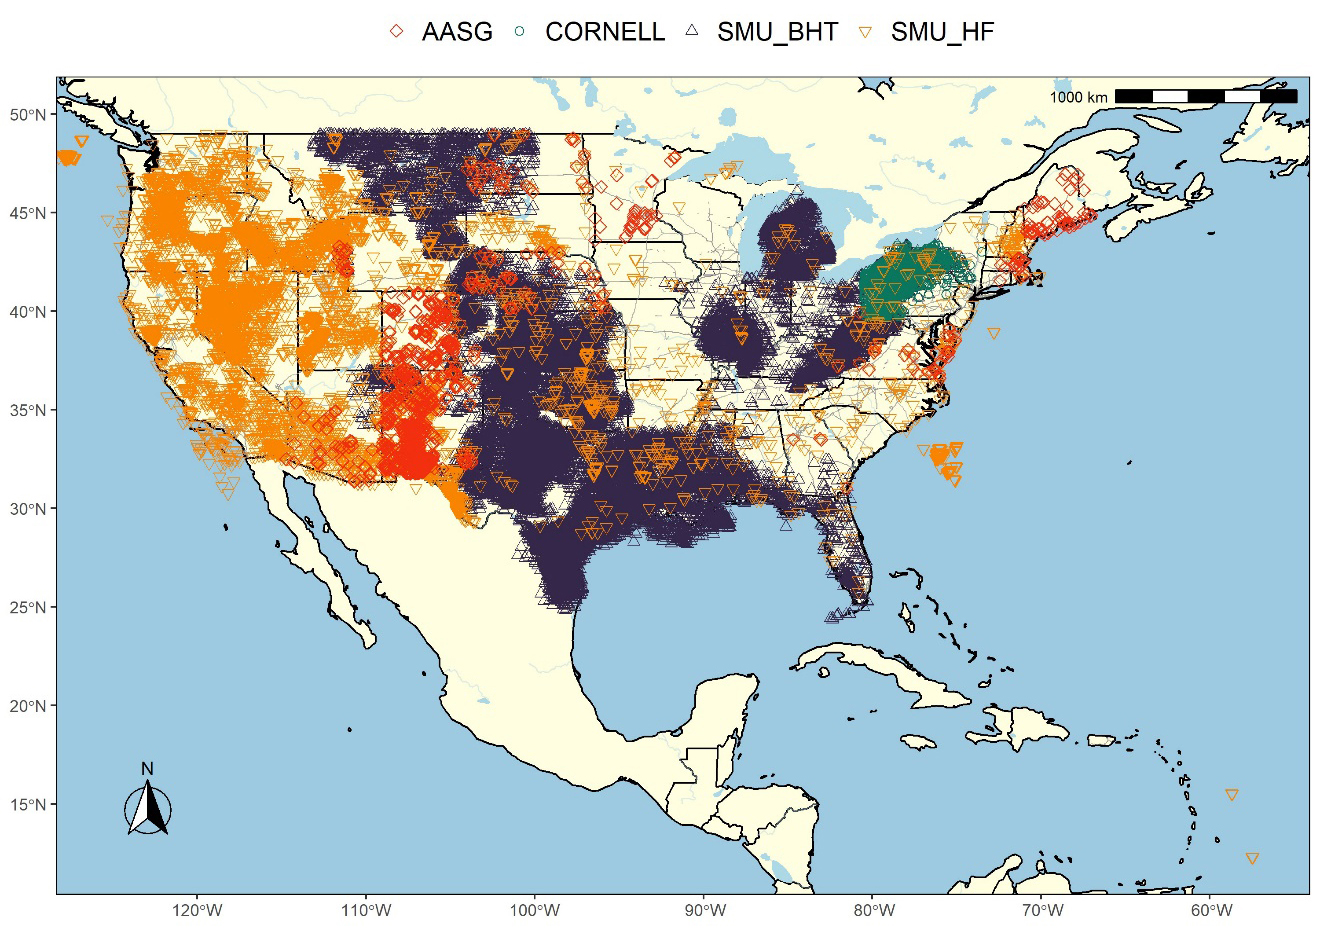 Spatial Distribution of U.S. Geothermal Data Points